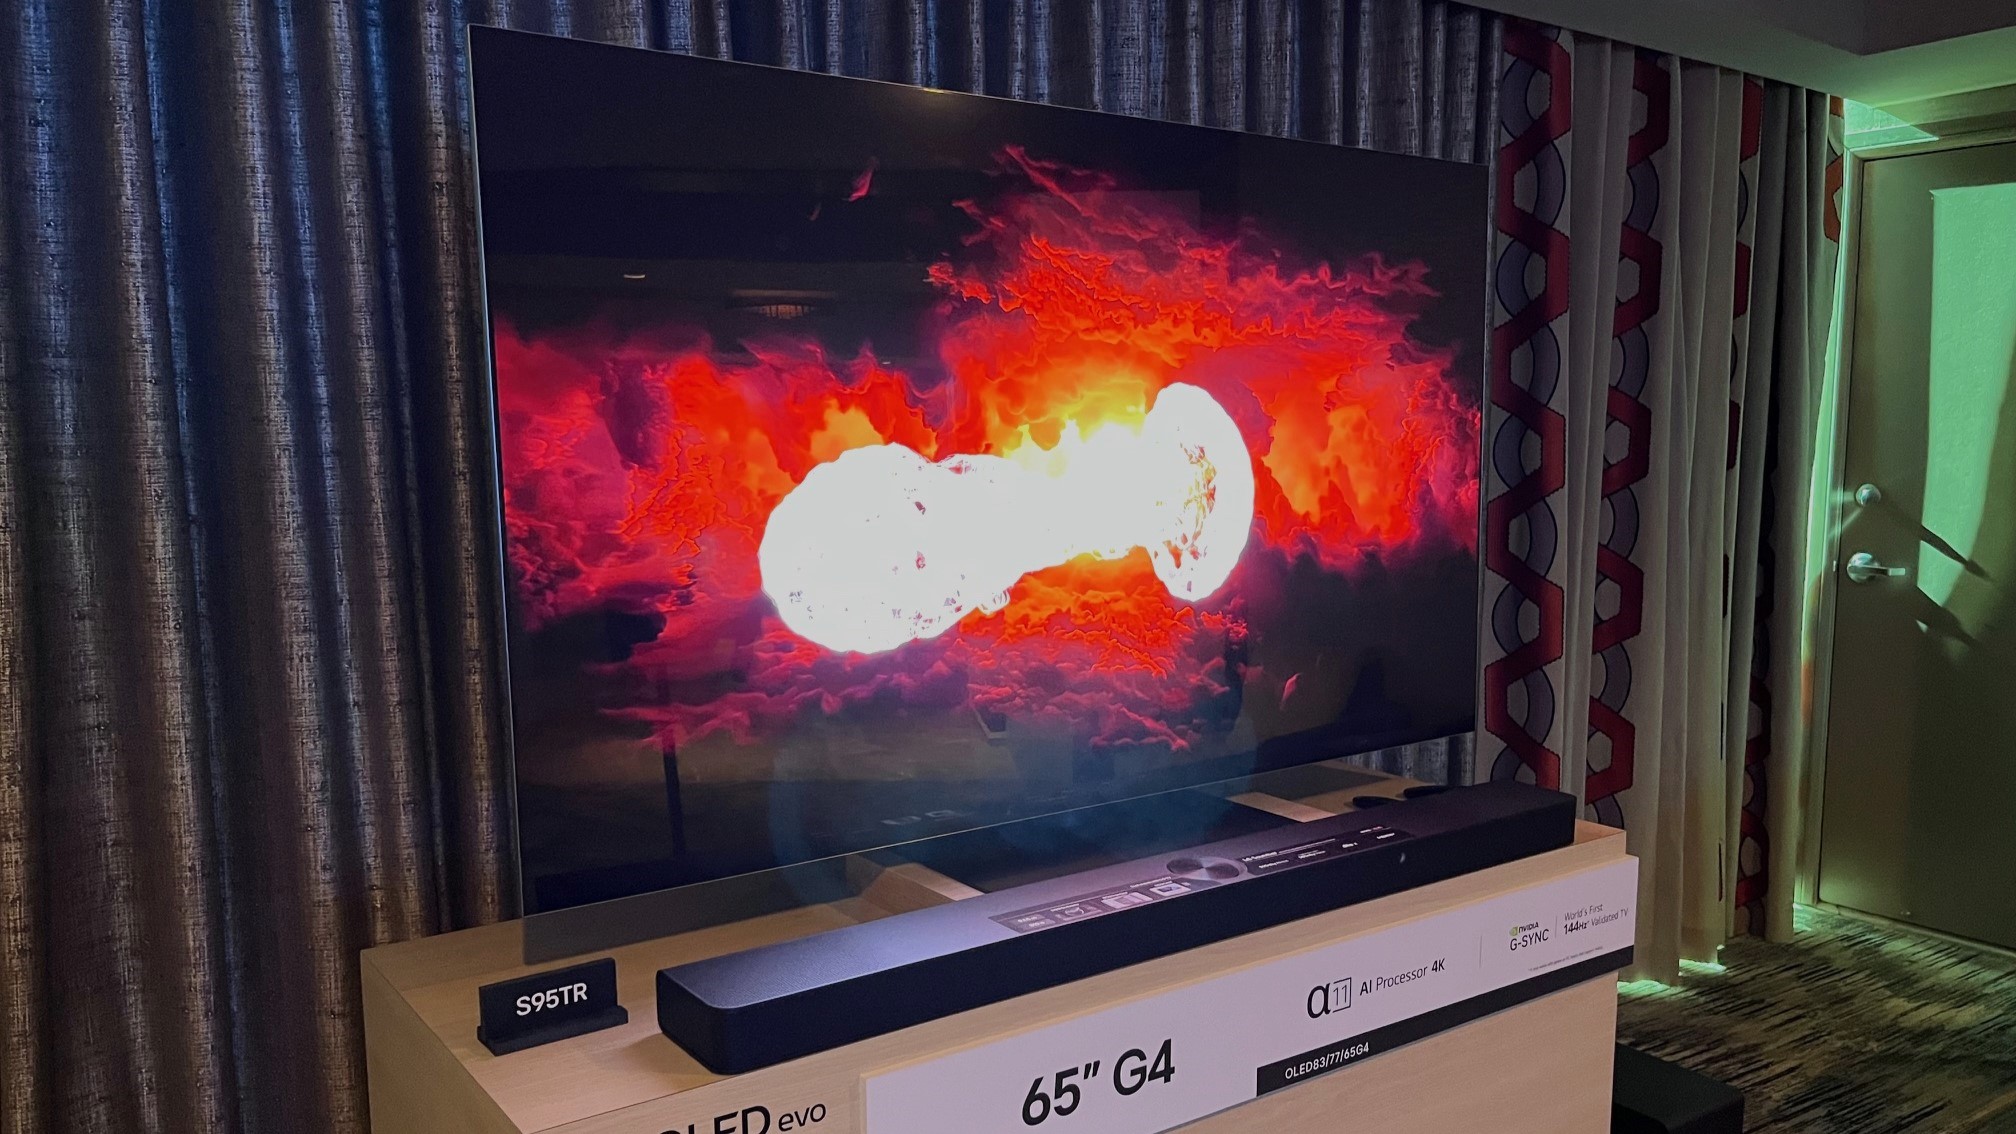 LG G4 OLED TV displaying abstract images